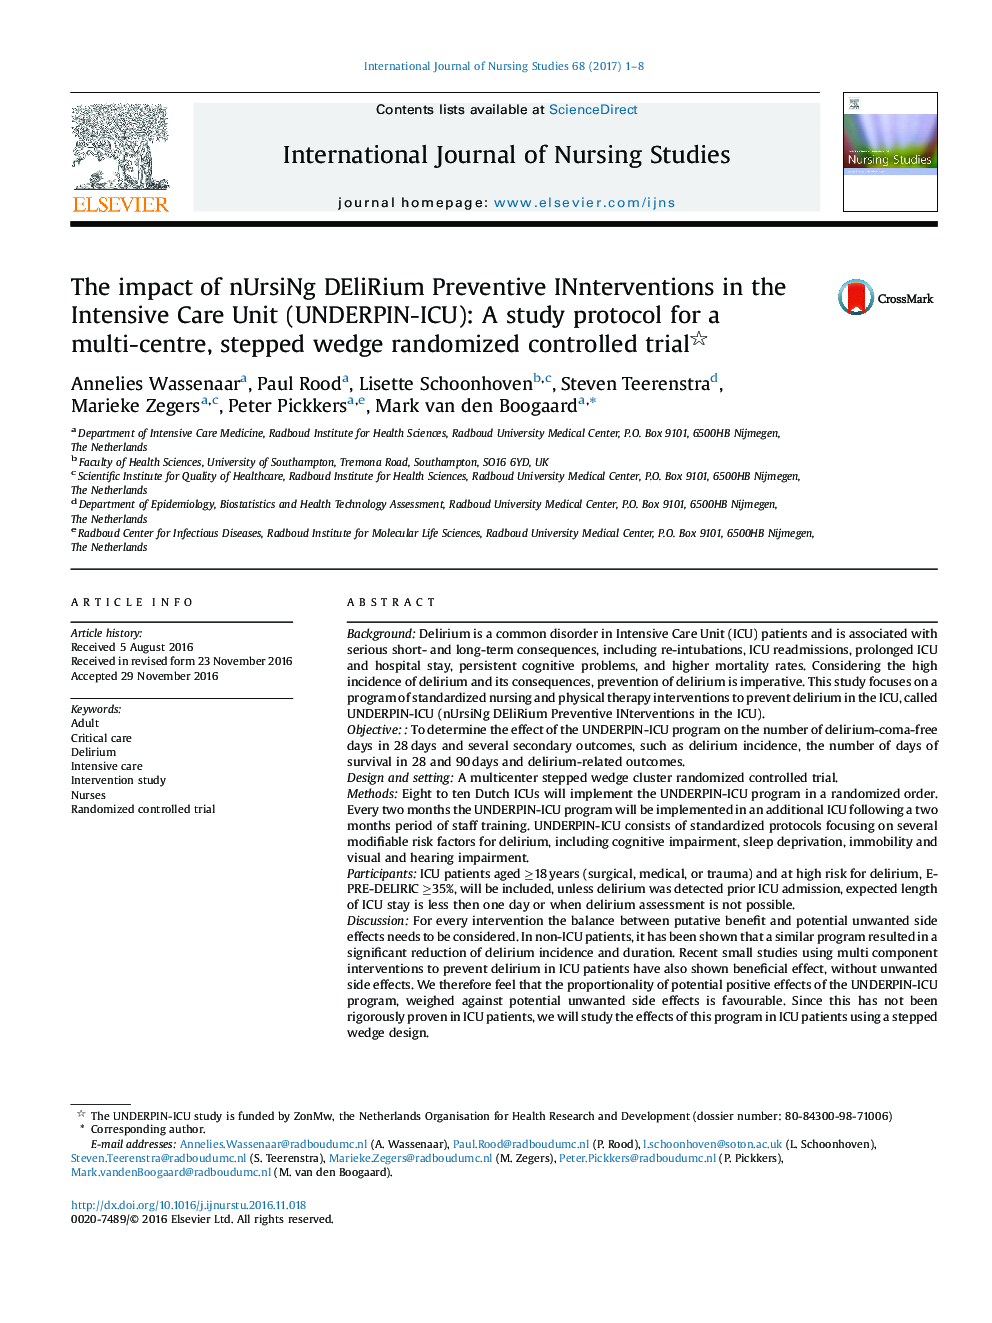 The impact of nUrsiNg DEliRium Preventive INnterventions in the Intensive Care Unit (UNDERPIN-ICU): A study protocol for a multi-centre, stepped wedge randomized controlled trial